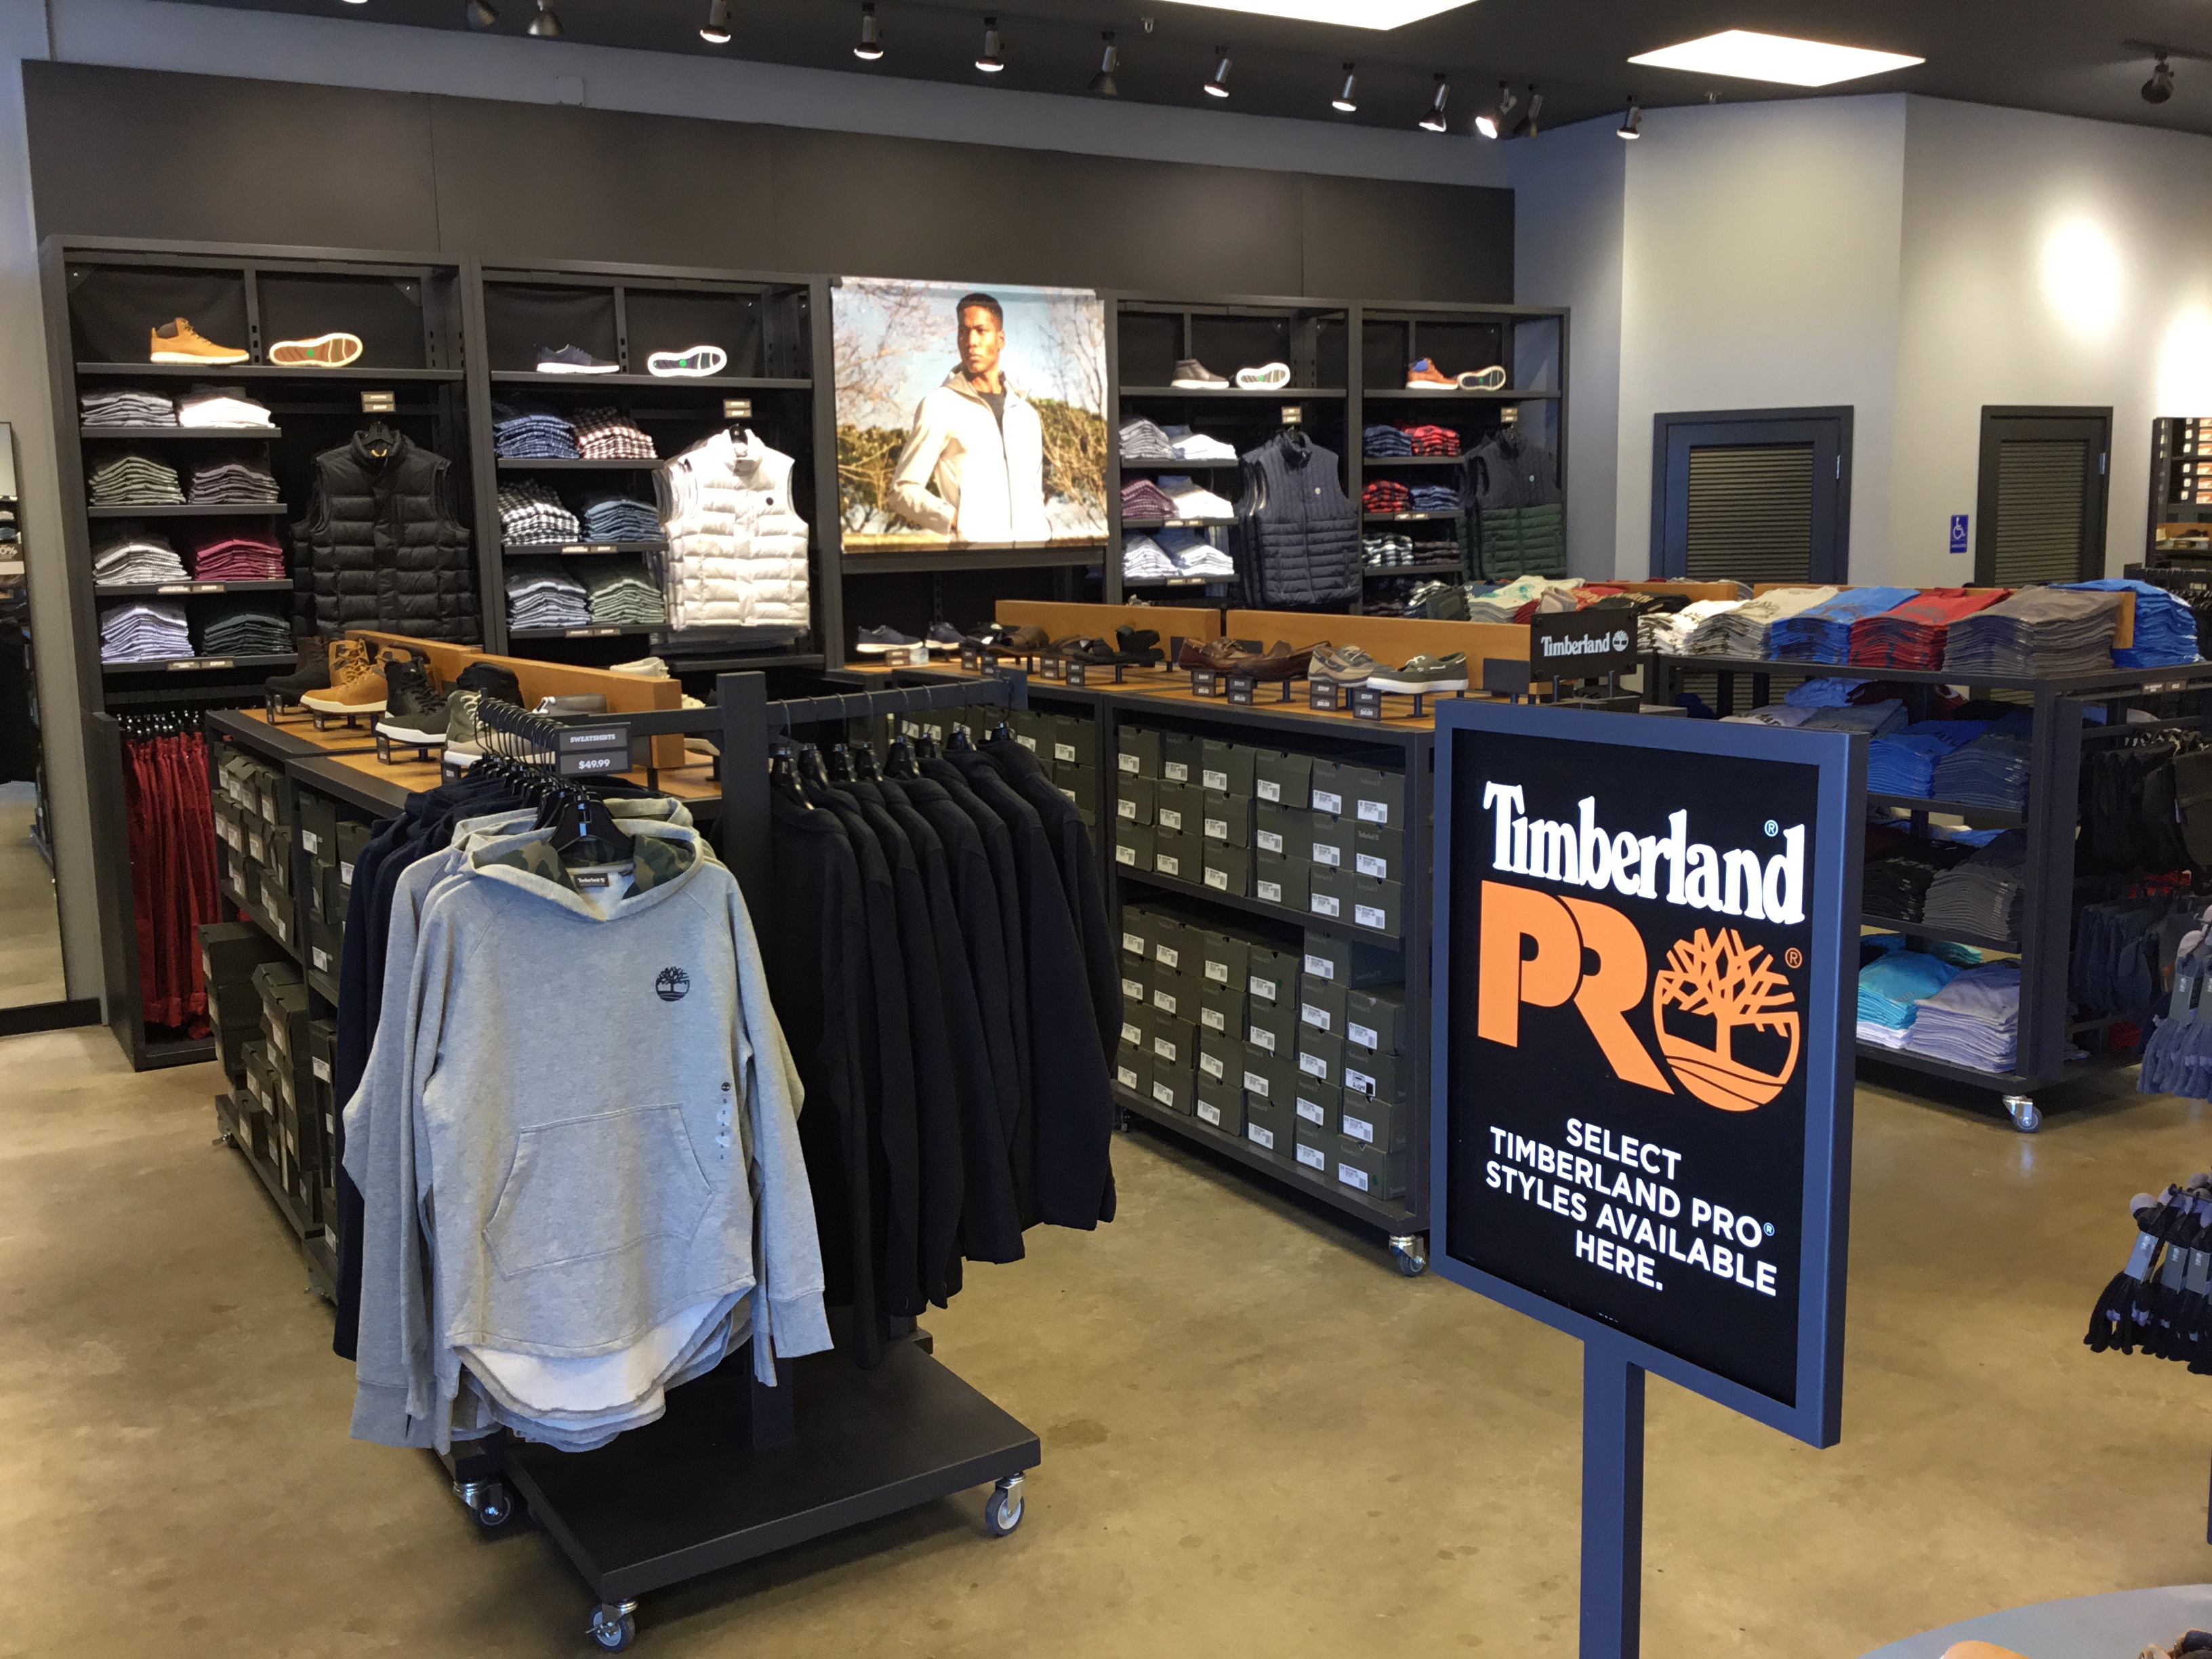 Sobretodo Popa Salto Timberland - Boots, Shoes, Clothing & Accessories in Rehoboth Beach, DE